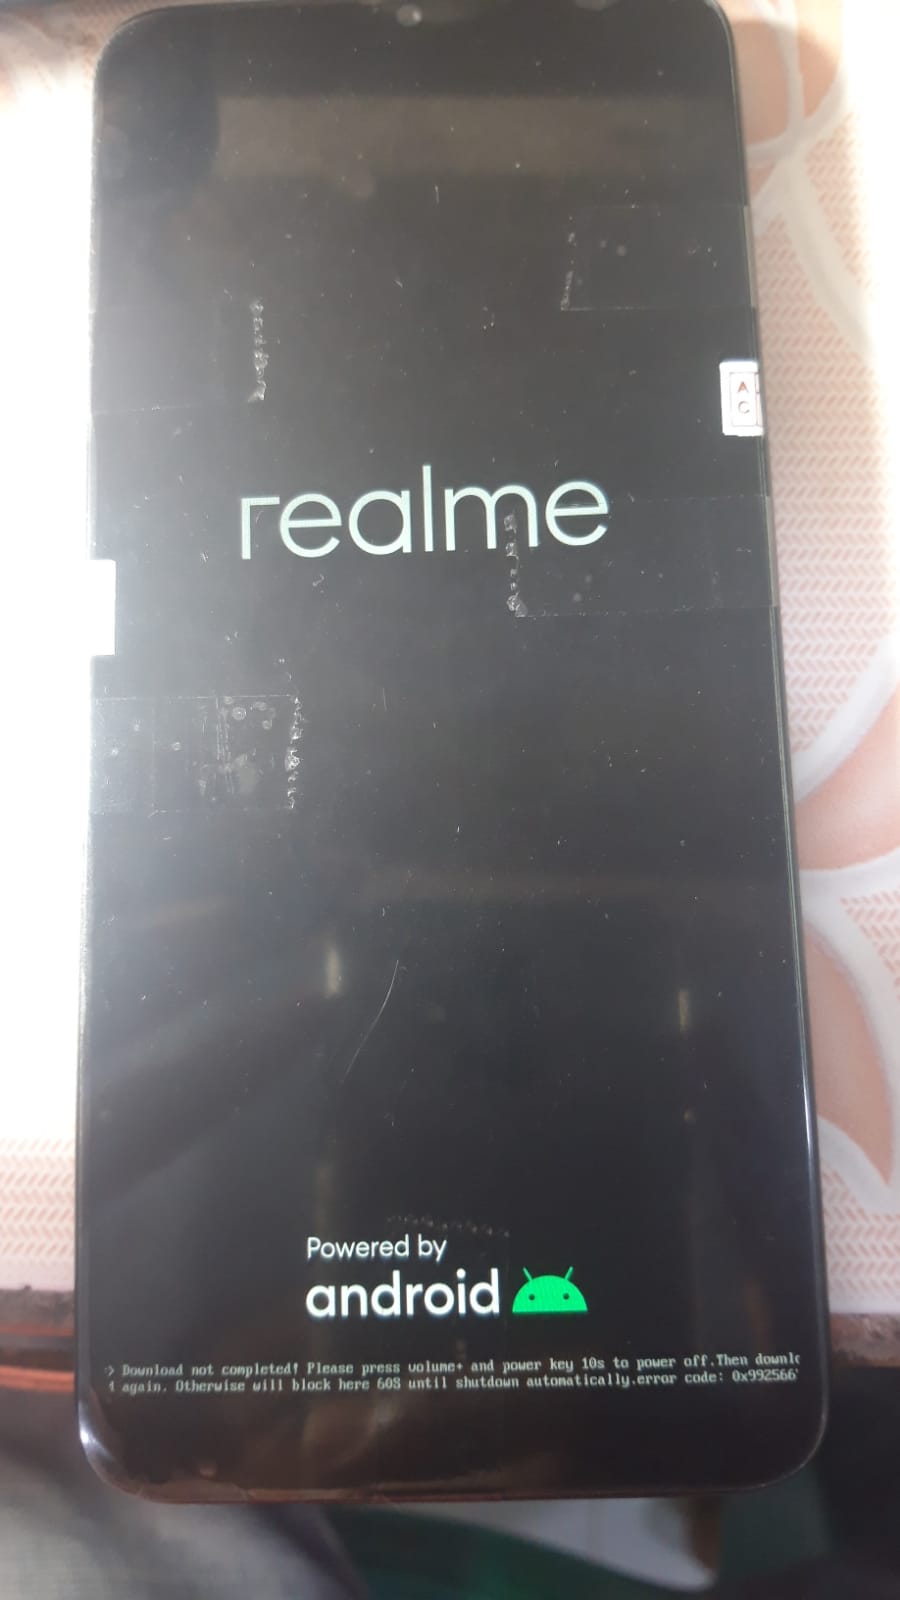 Realme Download not Complete